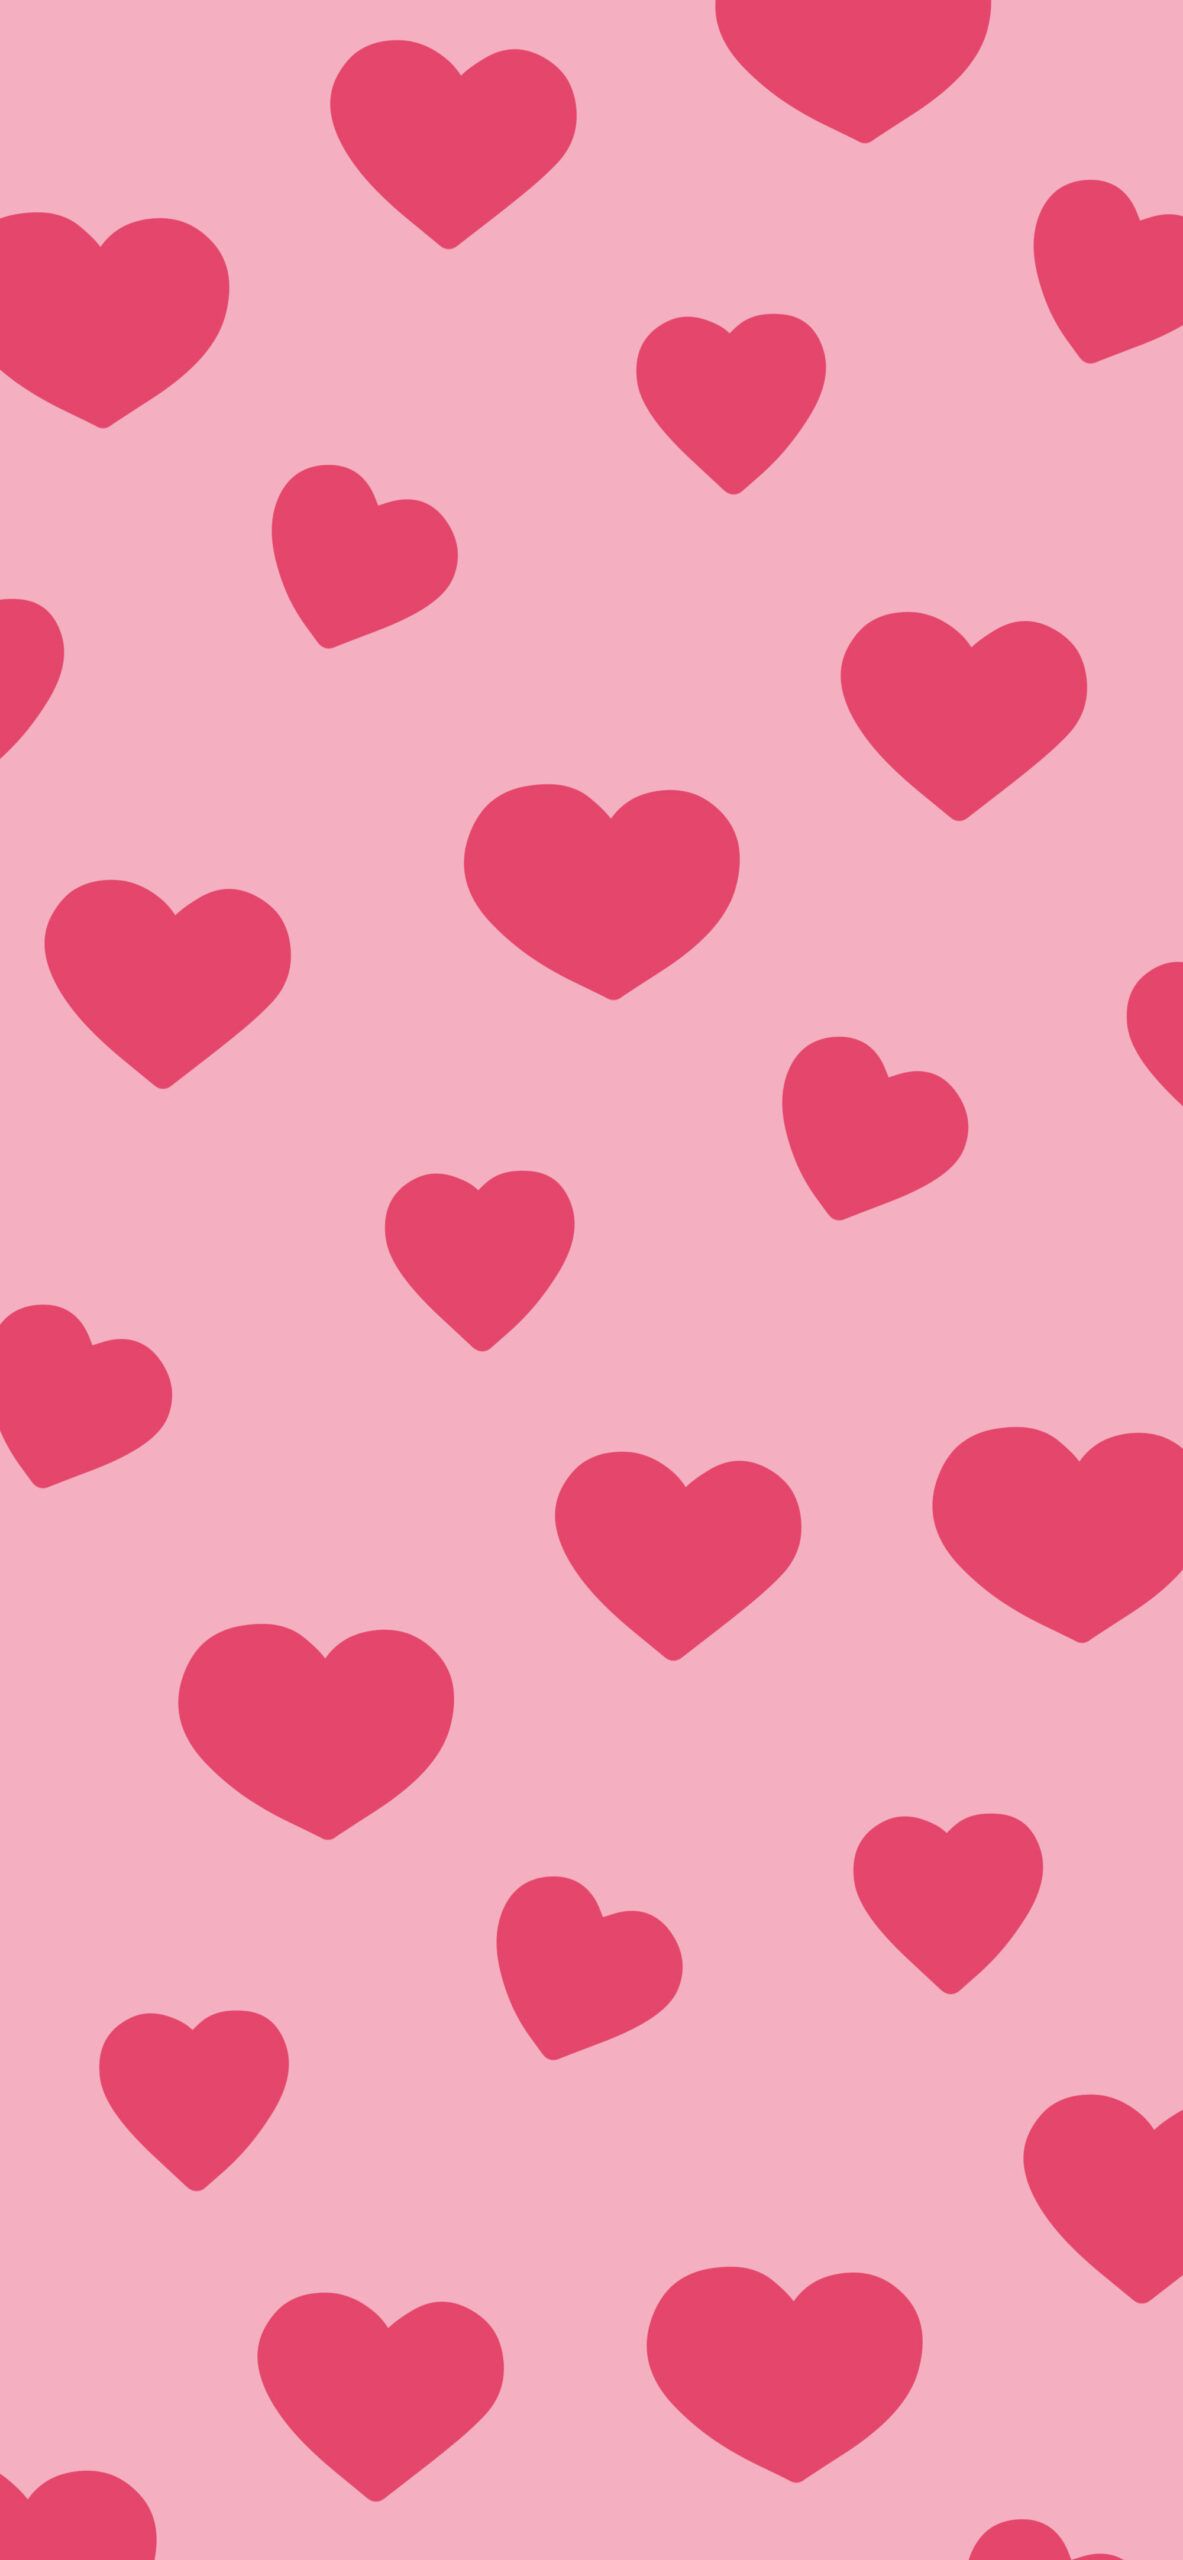 A pink background with a pattern of red hearts. - Pink heart